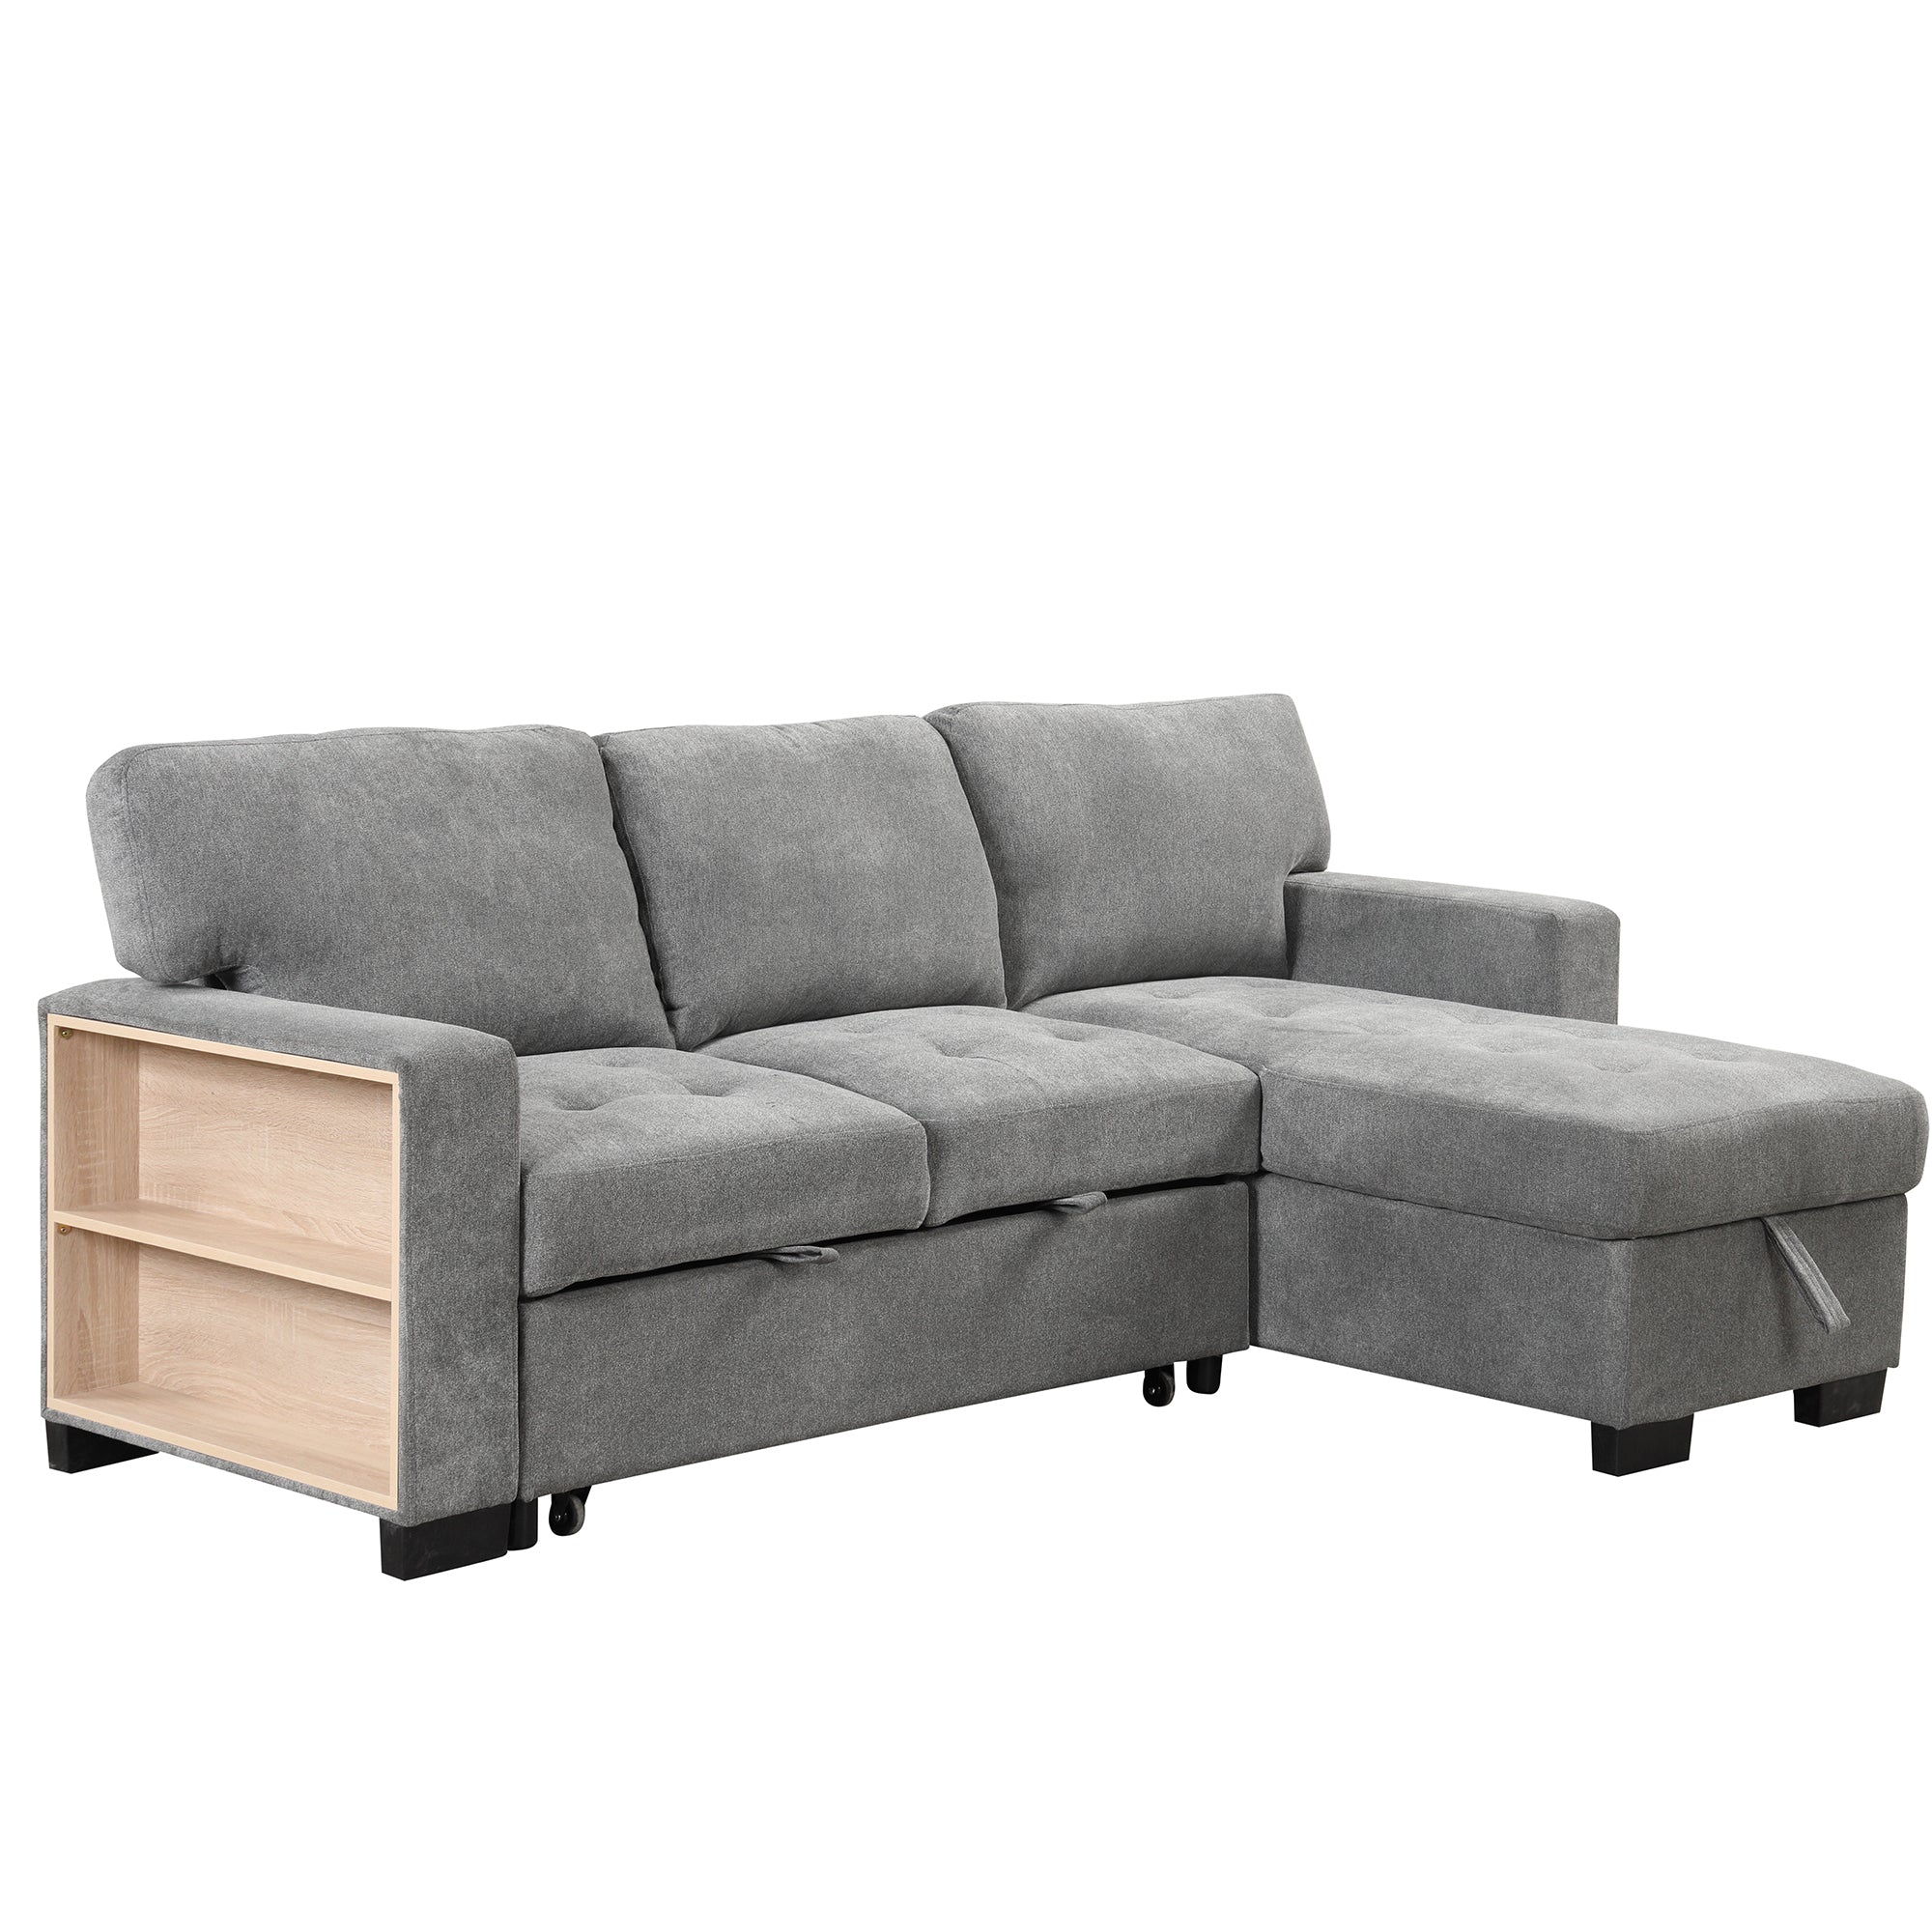 Stylish and Functional Light Chaise Lounge Sectional with Storage Rack, Pull-out Bed, Drop Down Table, and USB Charger | Gray | Ideal Addition to Your Living Space-Sleeper Sectionals-American Furniture Outlet